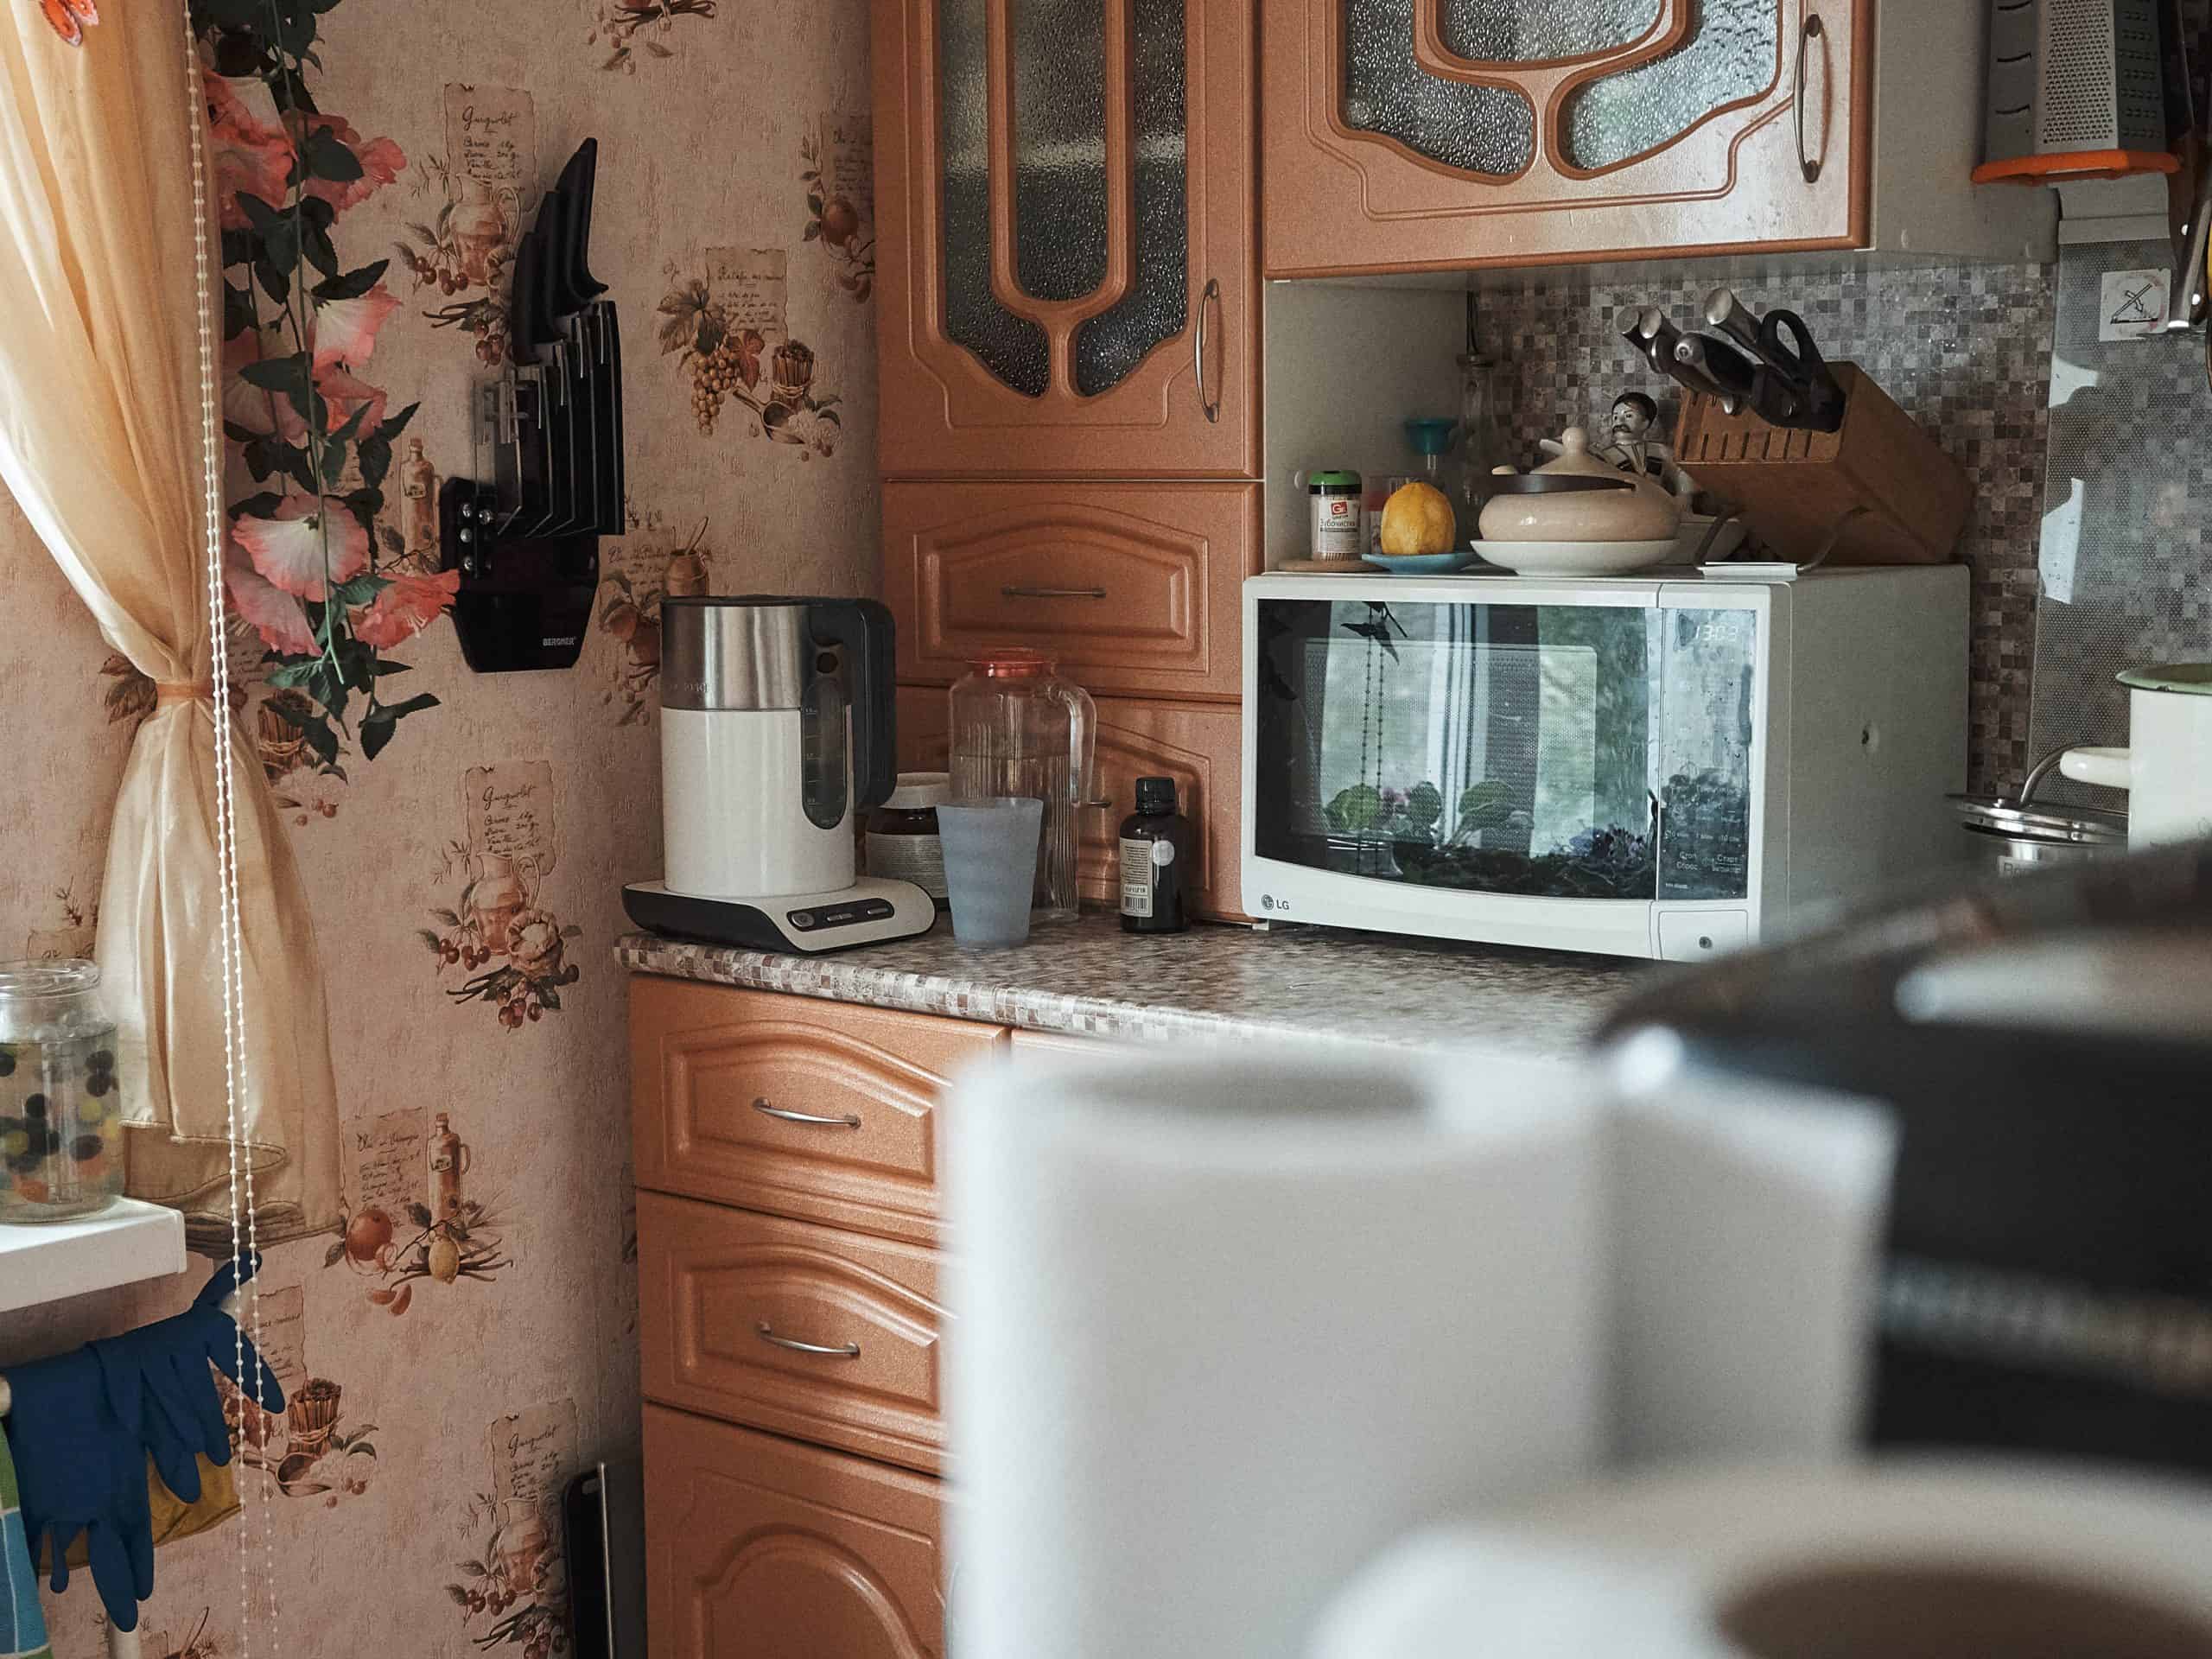 Basic microwave in a cluttered kitchen.